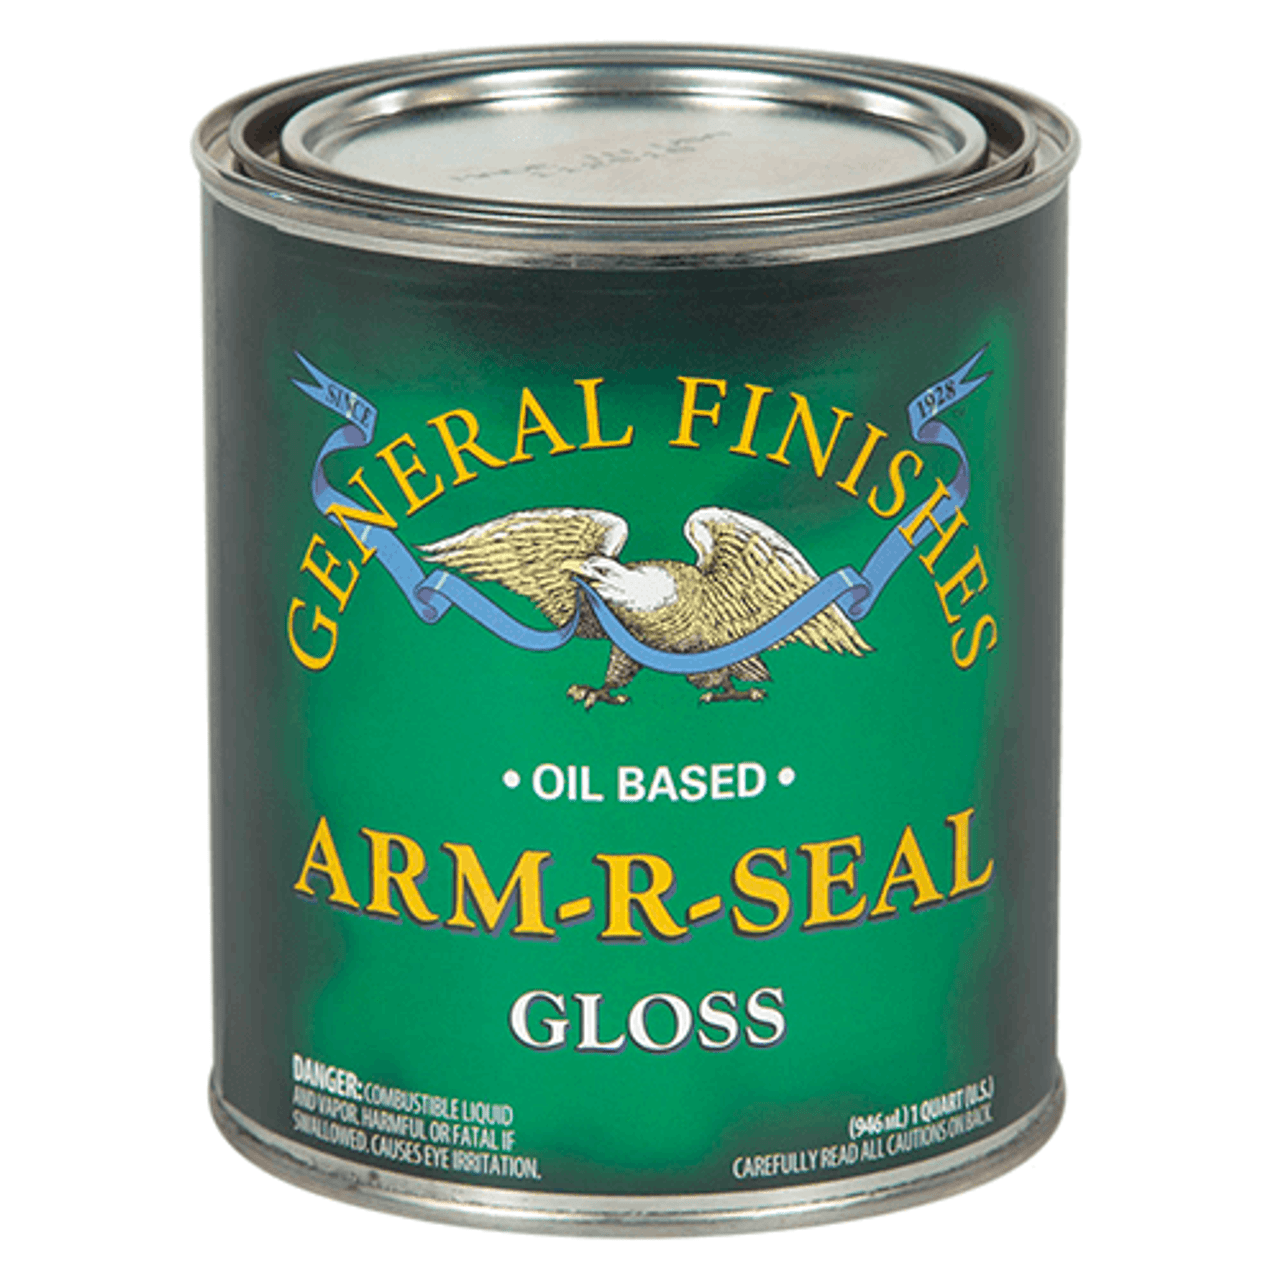 General Finishes Arm-R-Seal Clear Gloss Oil Wipe-On Top Coat, Quart